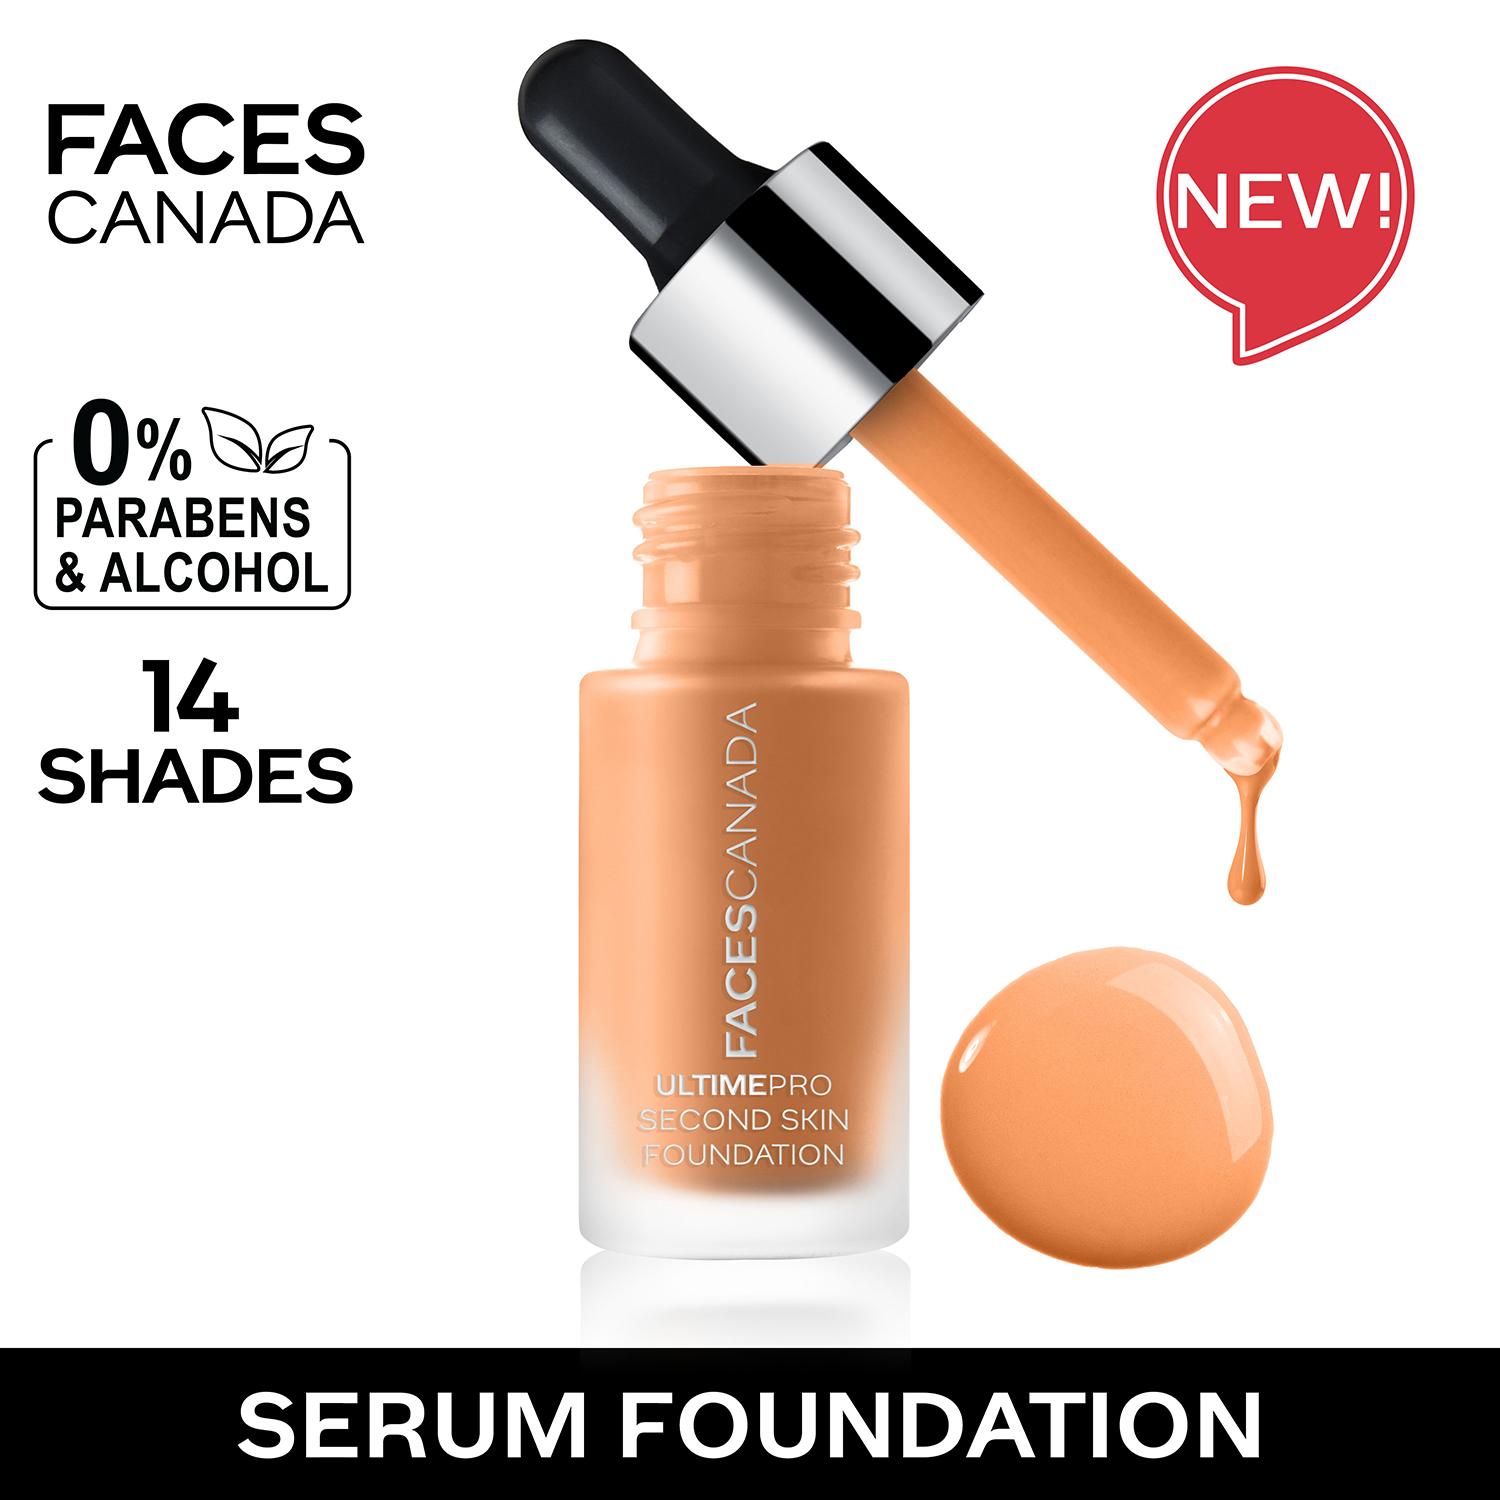 Faces Canada | Faces Canada Ultime Pro Second Skin Foundation - Golden Beige 032, Matte Finish, SPF 15 (15 ml)